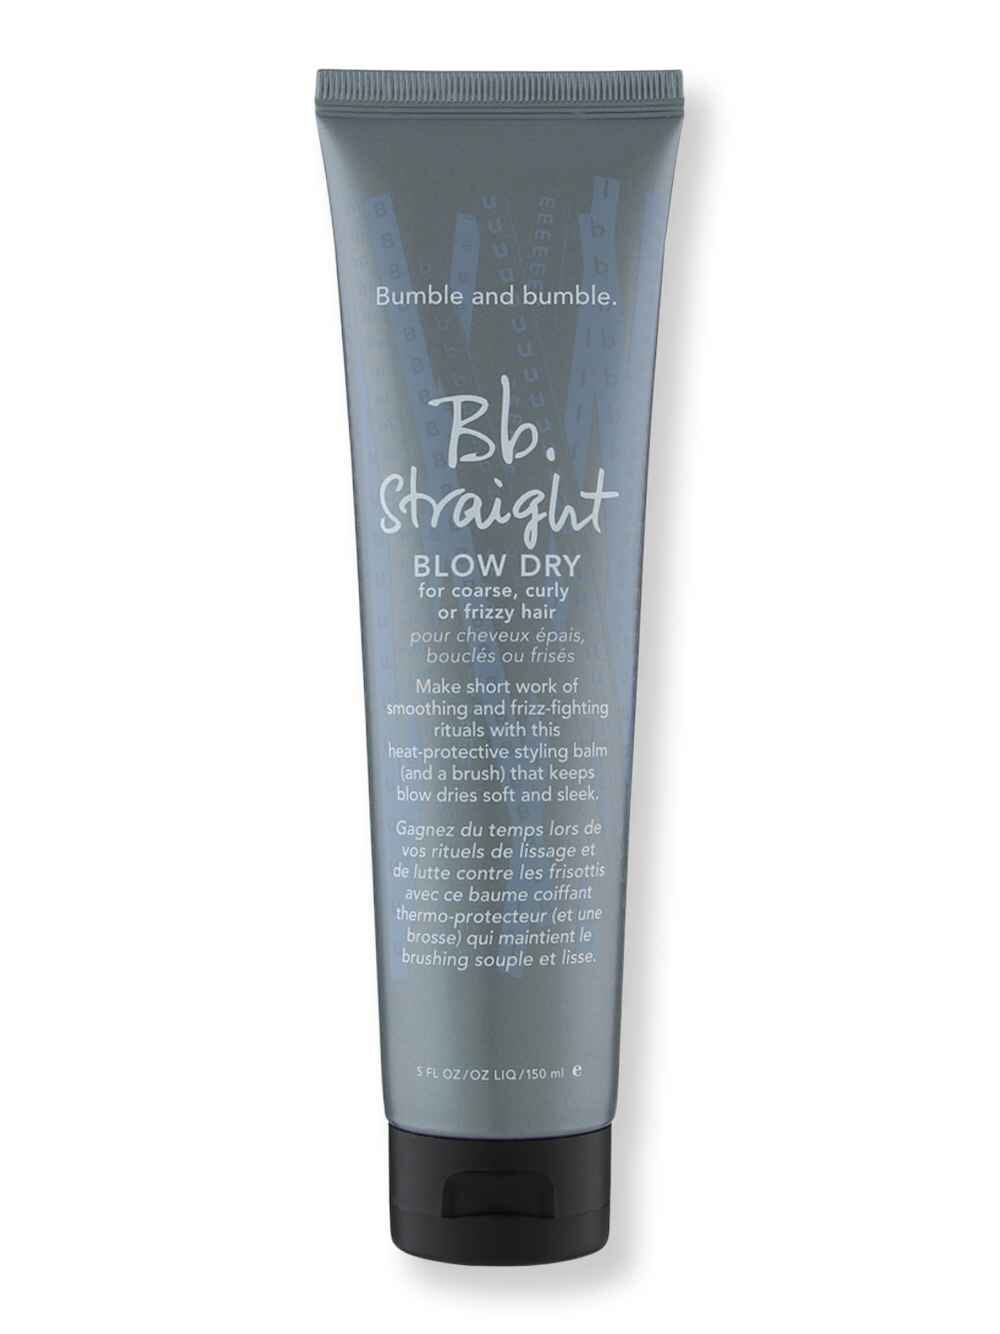 Bumble and bumble Bumble and bumble Bb.Straight Blow Dry 5 oz Styling Treatments 